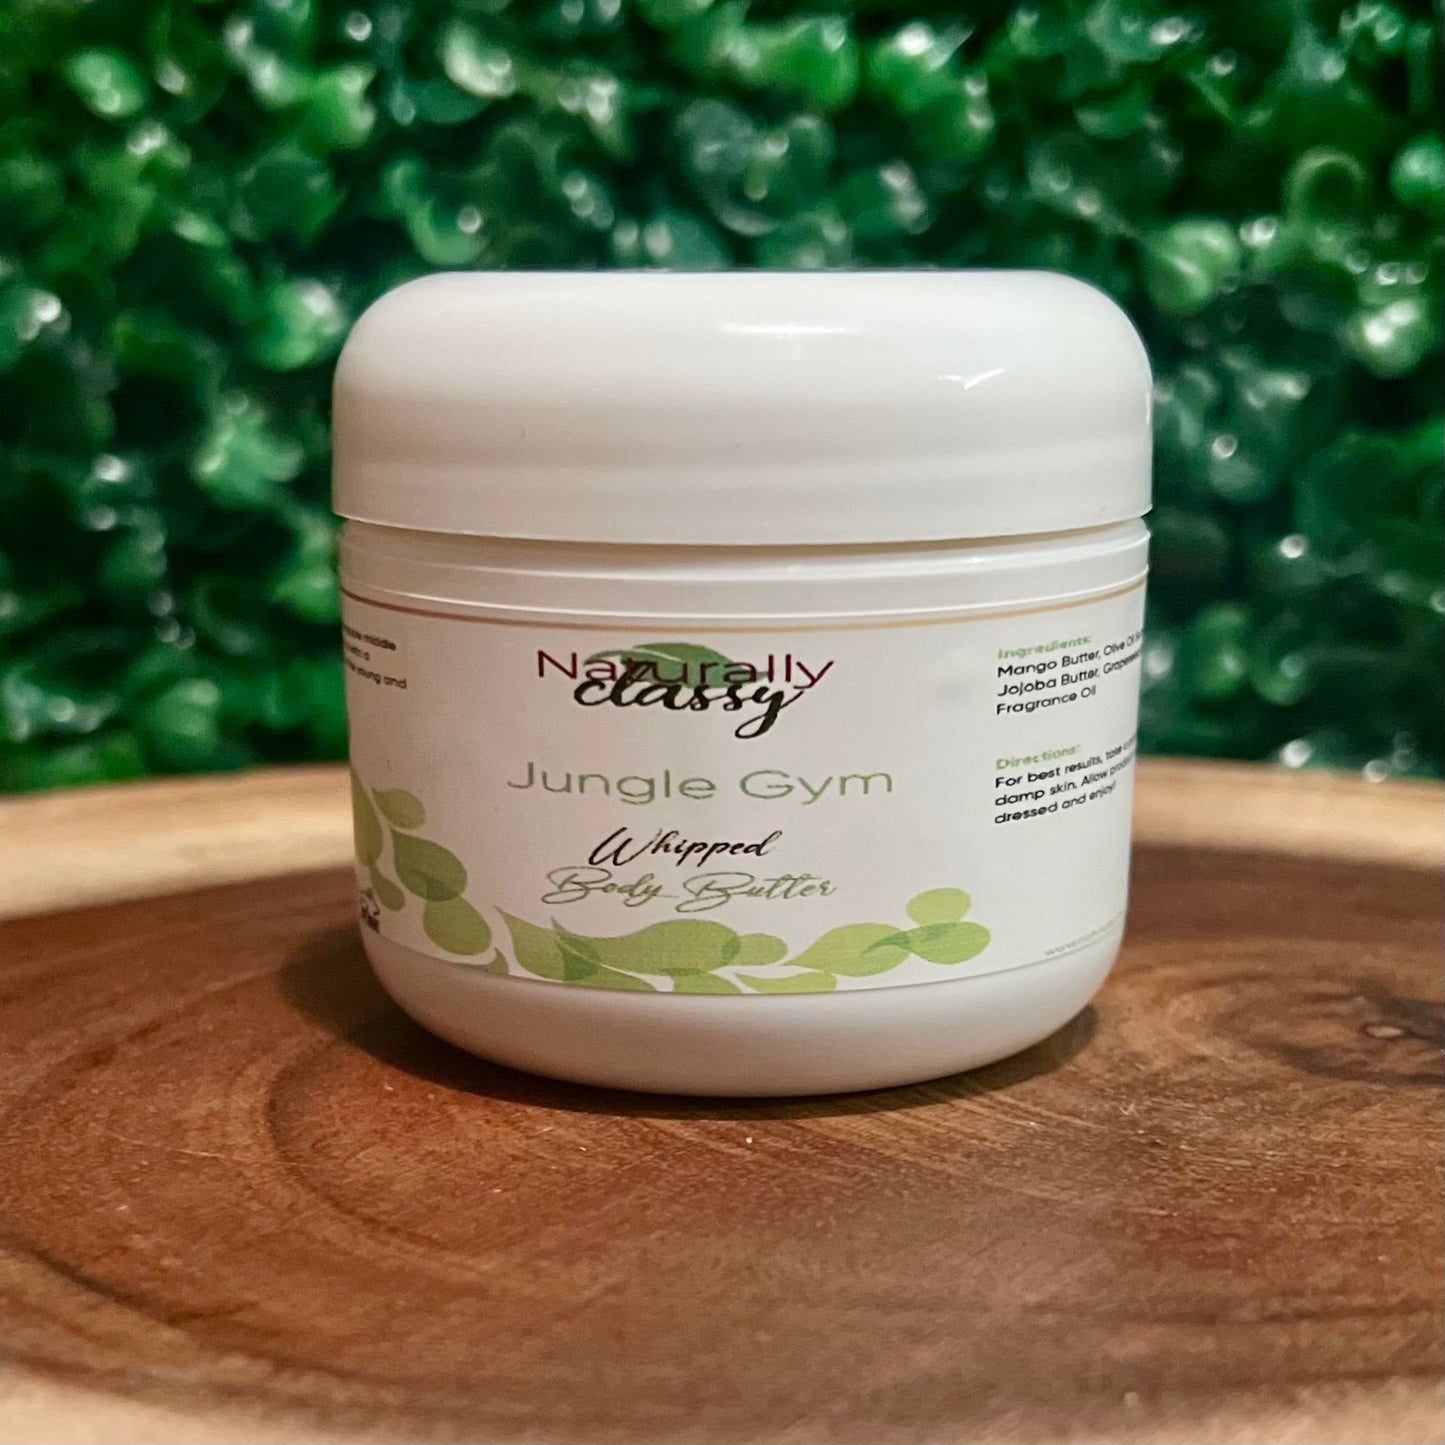 Jungle Gym Whipped Body Butter for kids